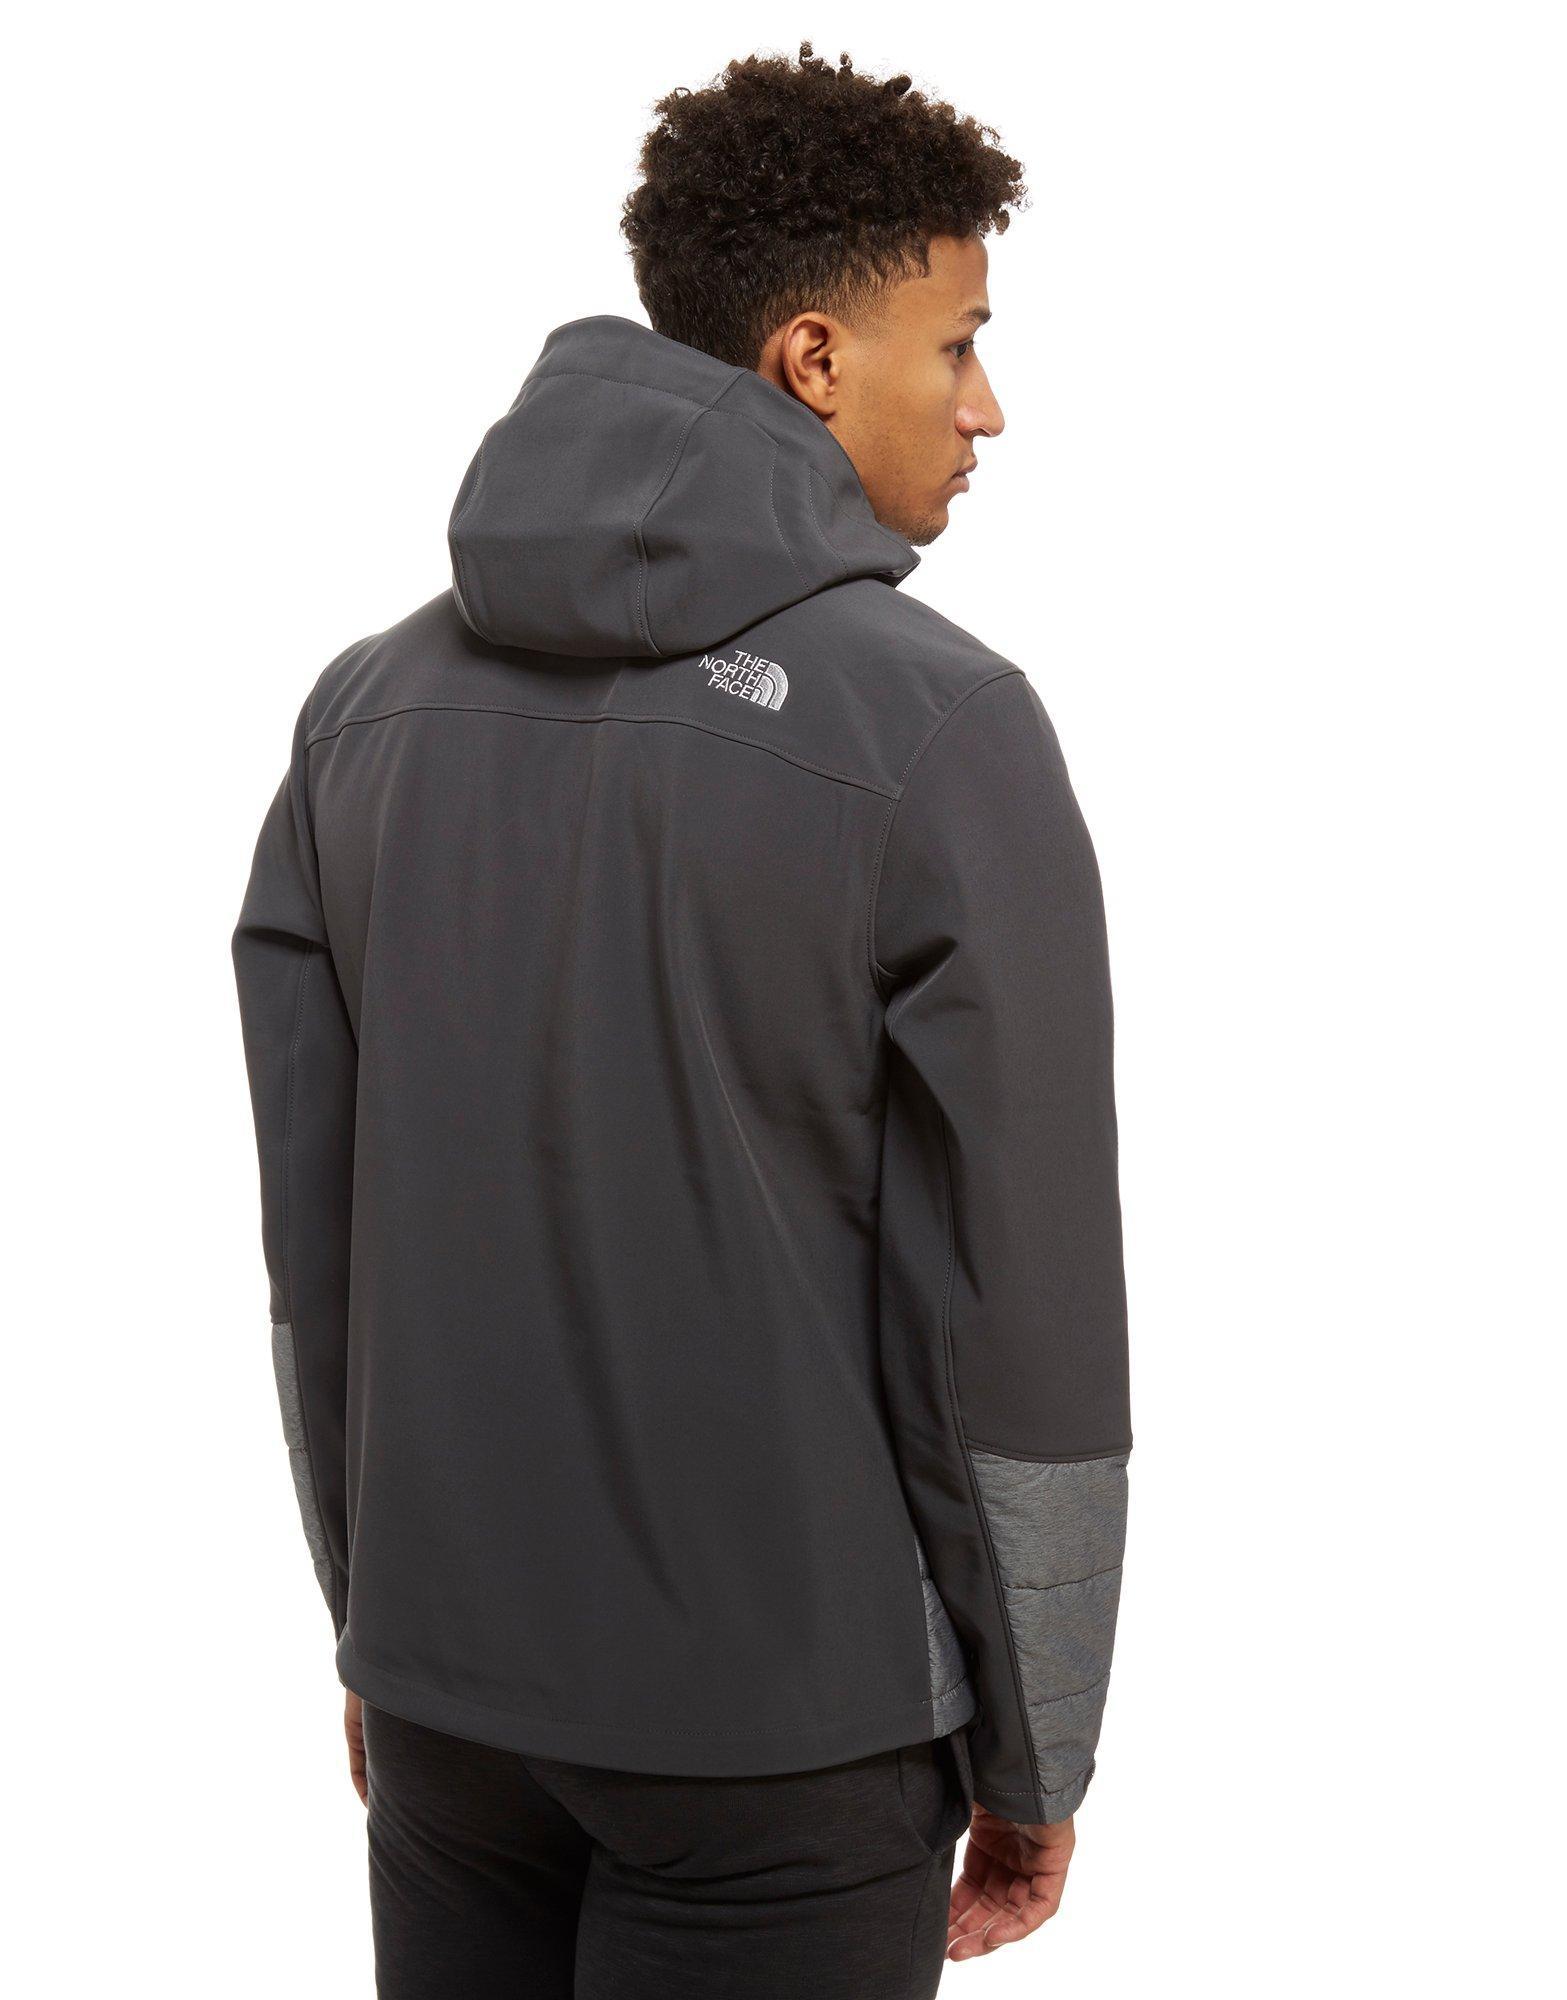 Lyst - The North Face Tompkins Hybrid Jacket in Gray for Men